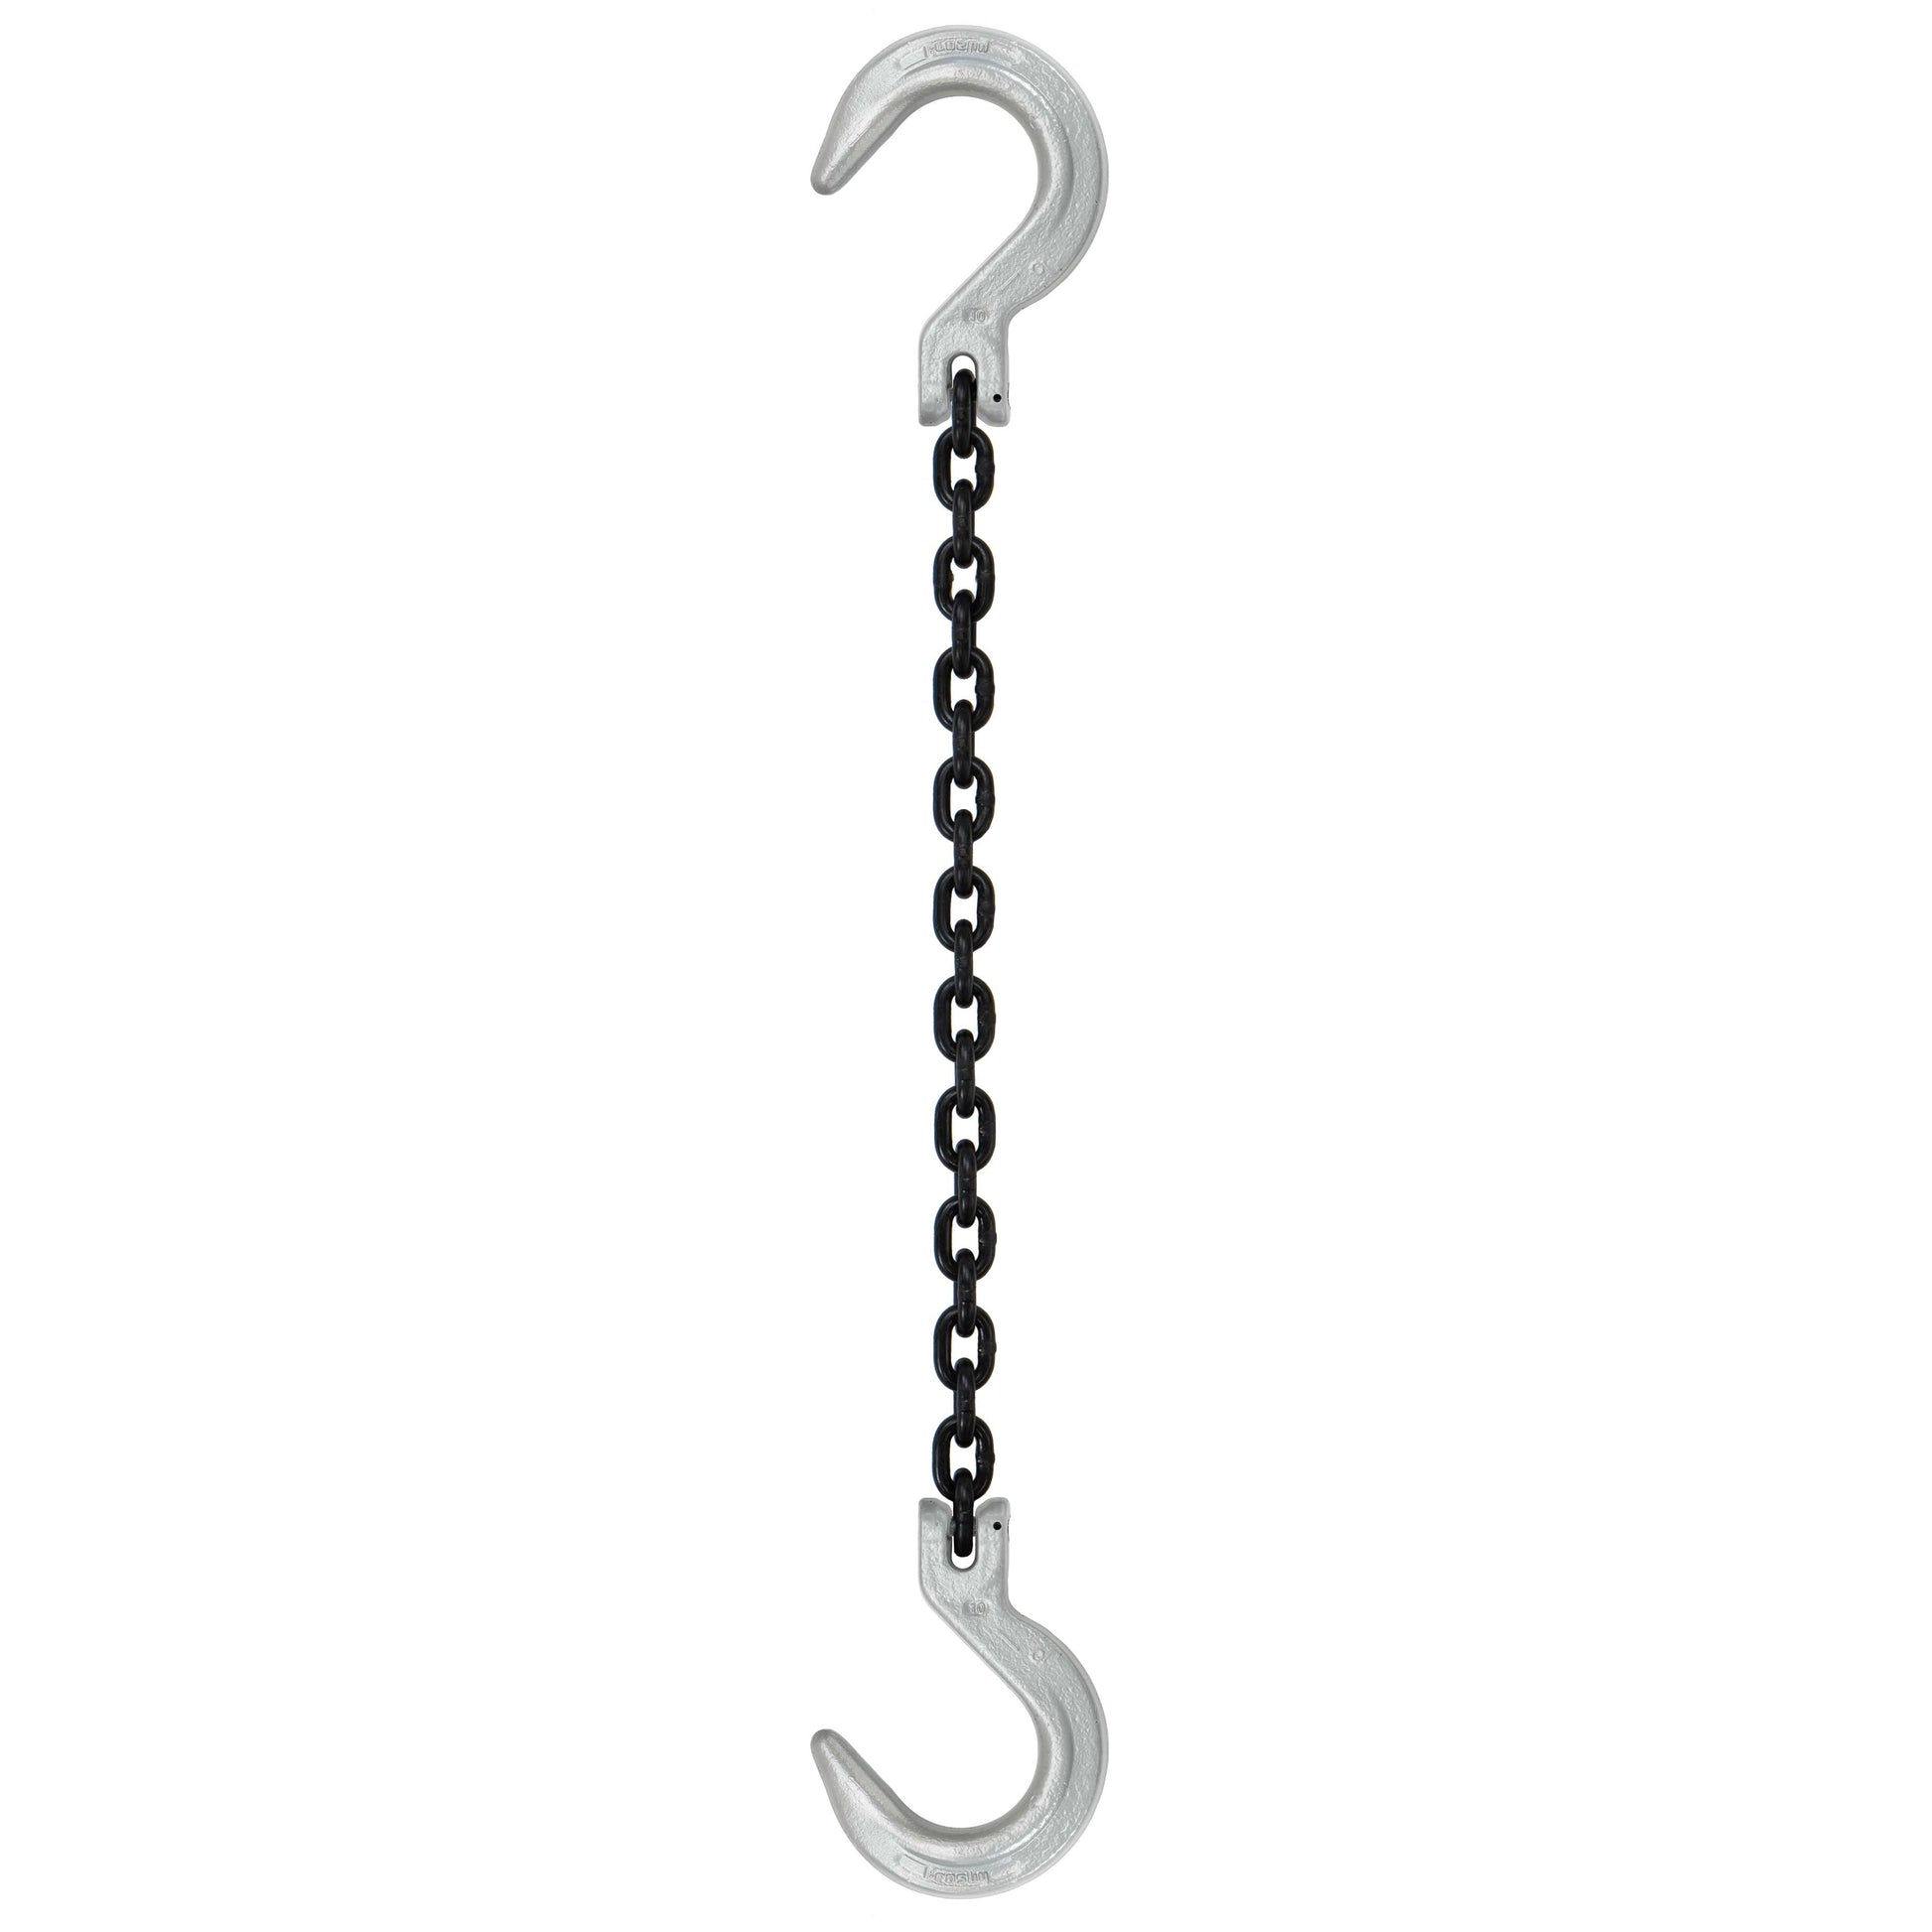 12 inch x 4 foot Domestic Single Leg Chain Sling w Crosby Foundry & Foundry Hooks Grade 100 image 1 of 2